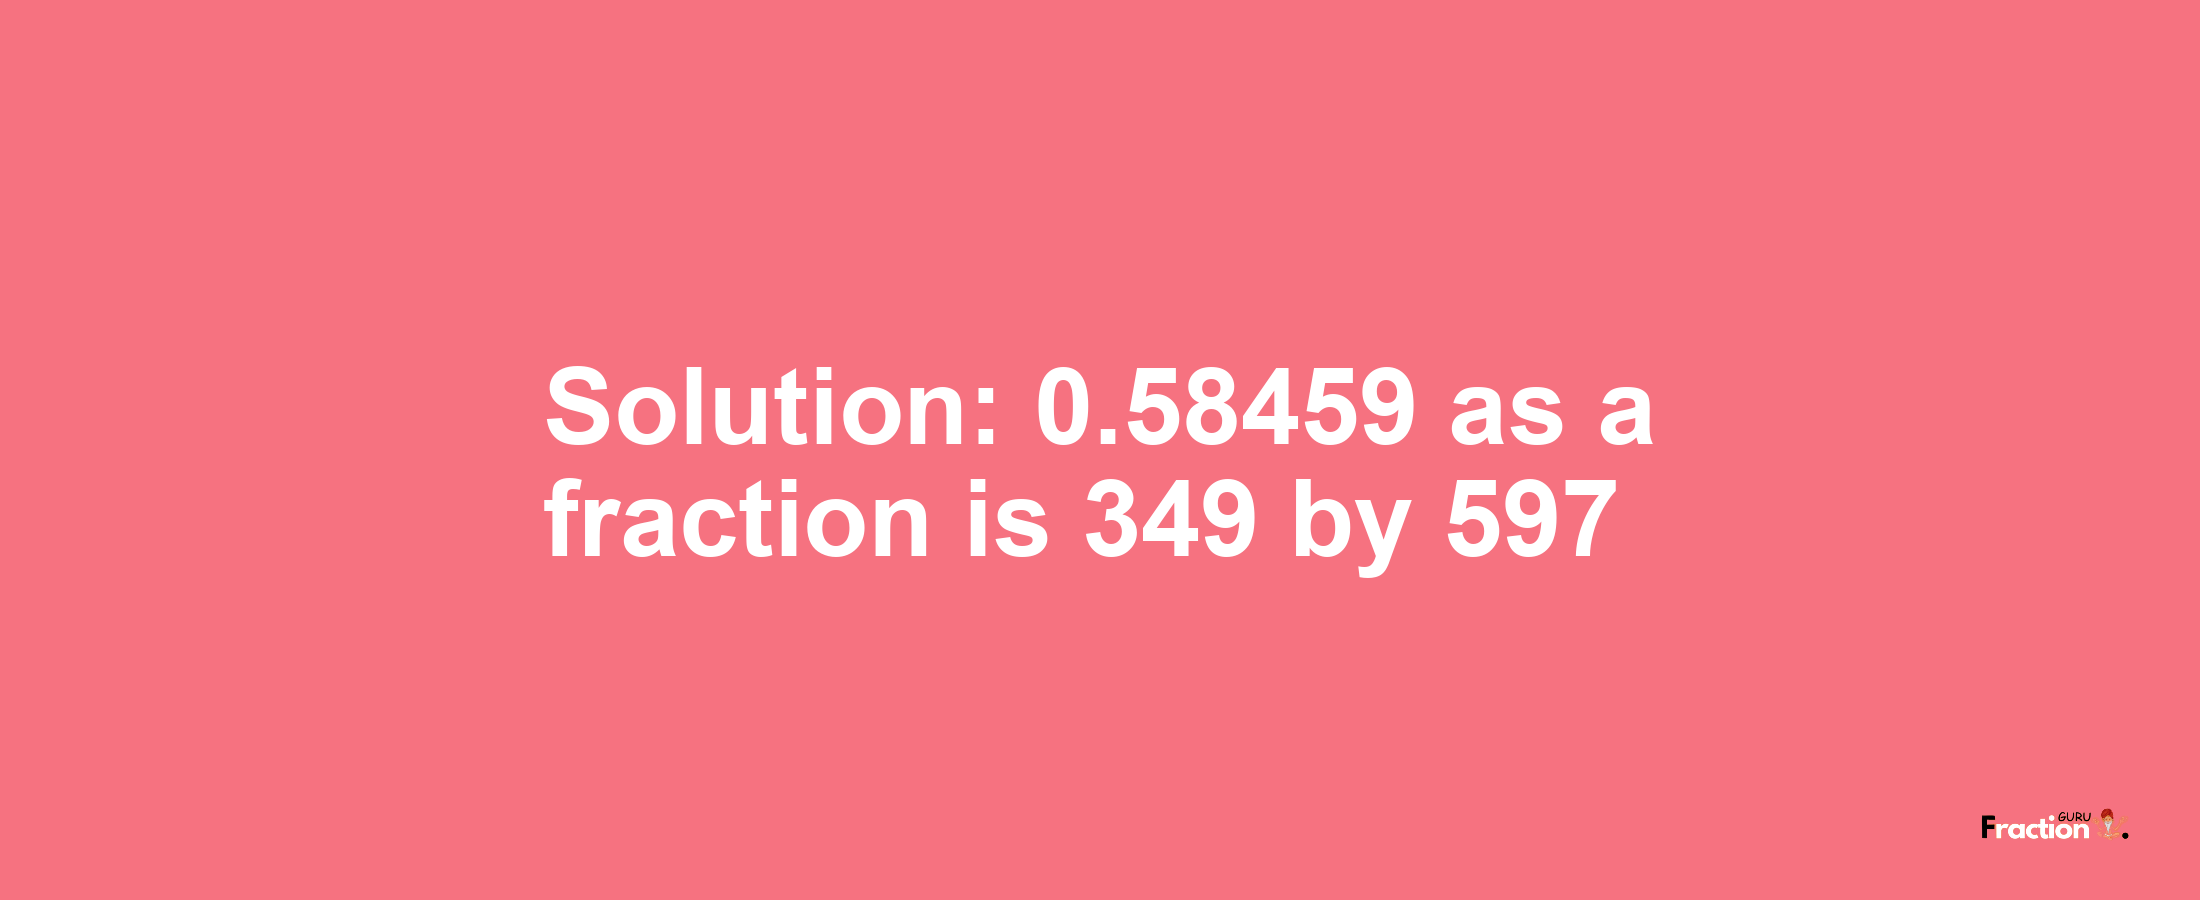 Solution:0.58459 as a fraction is 349/597